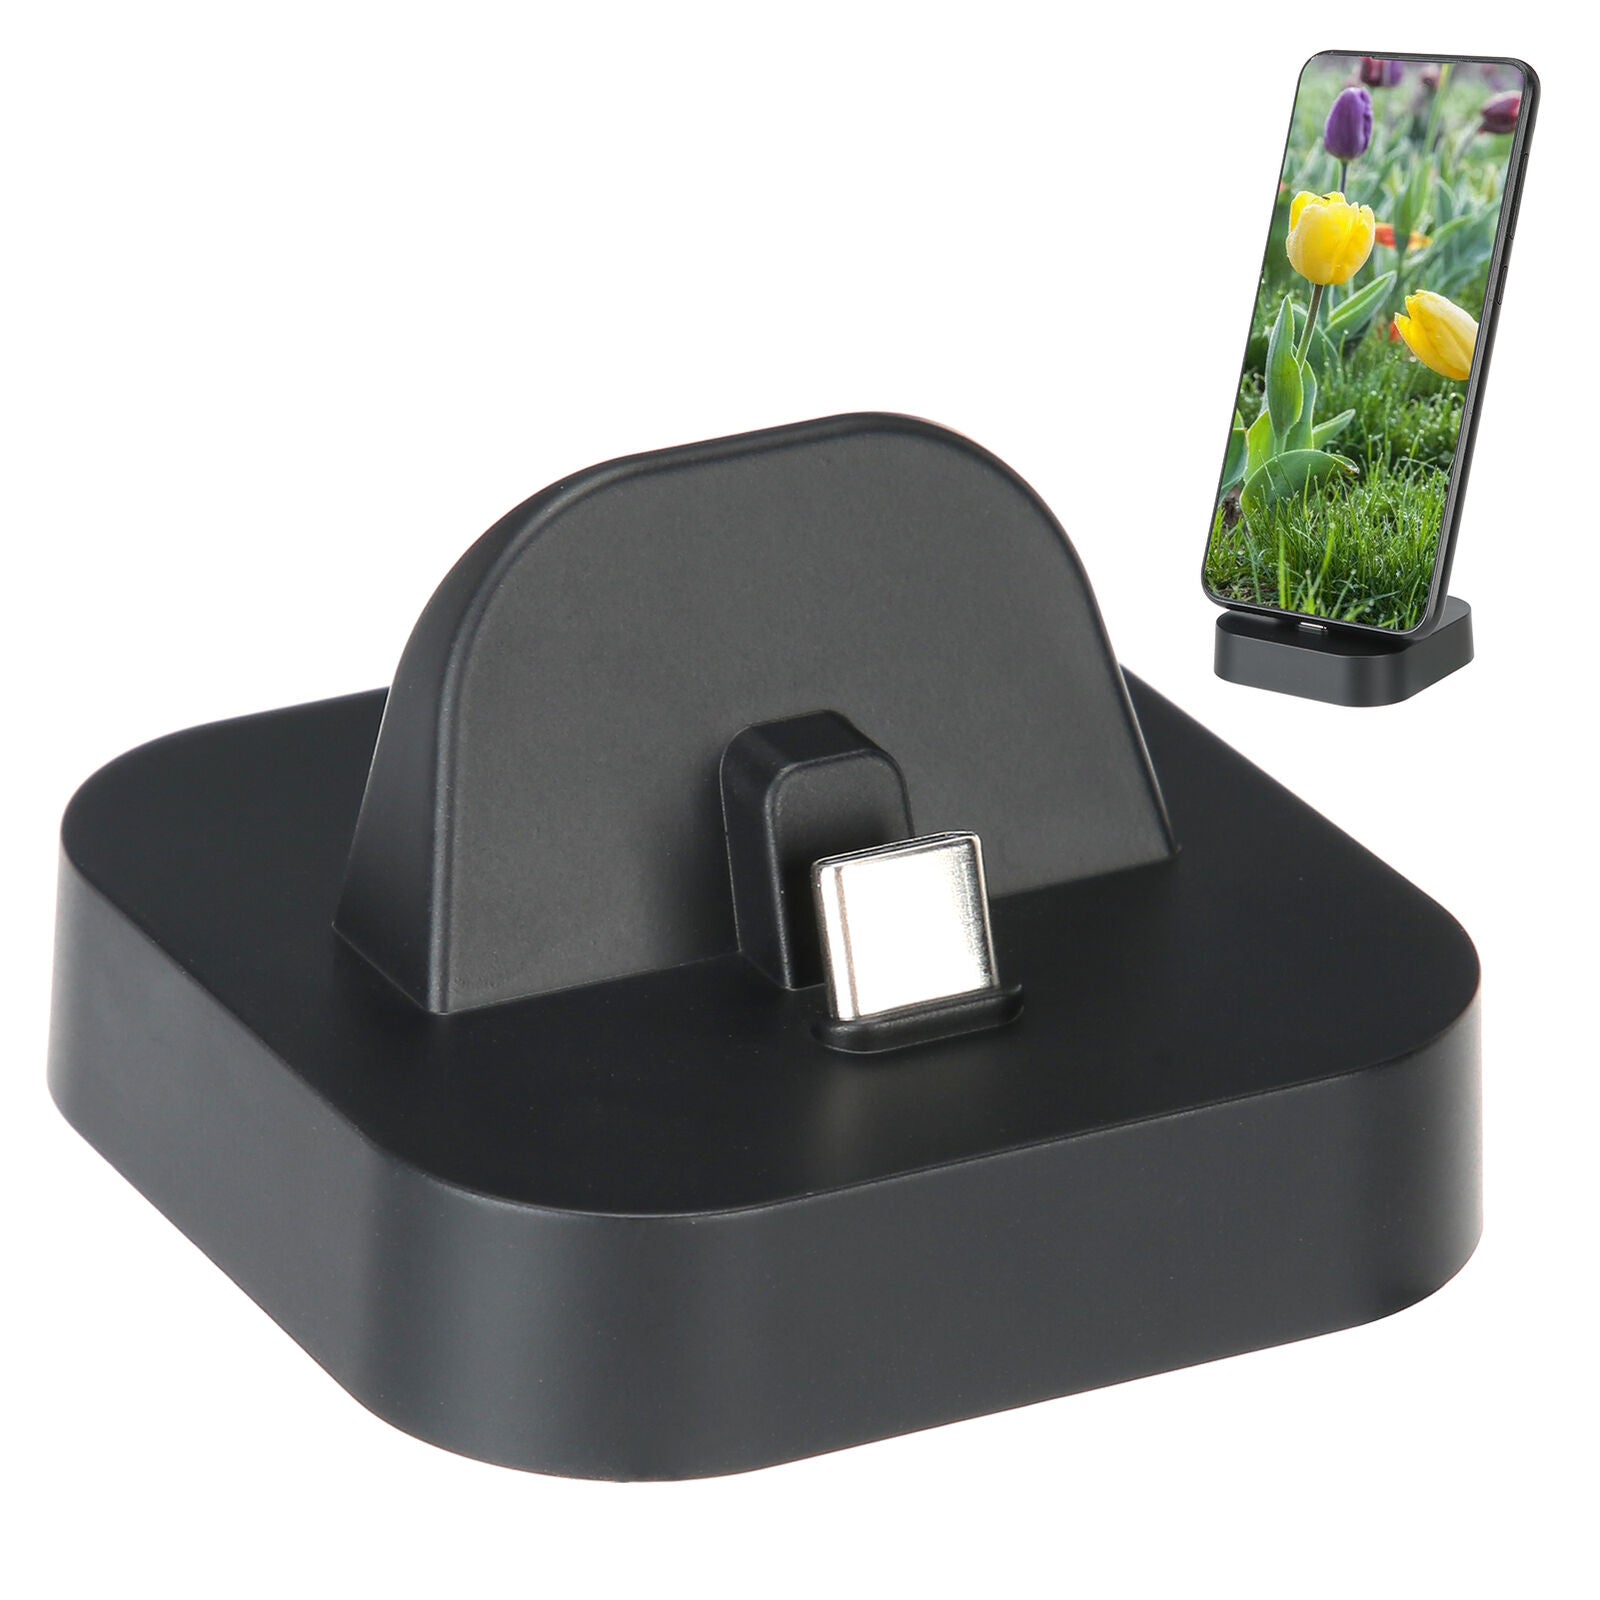 USB Typeâ€‘C Charging Dock Type C Charger For Switch/Lite Easy To Use Novel Design